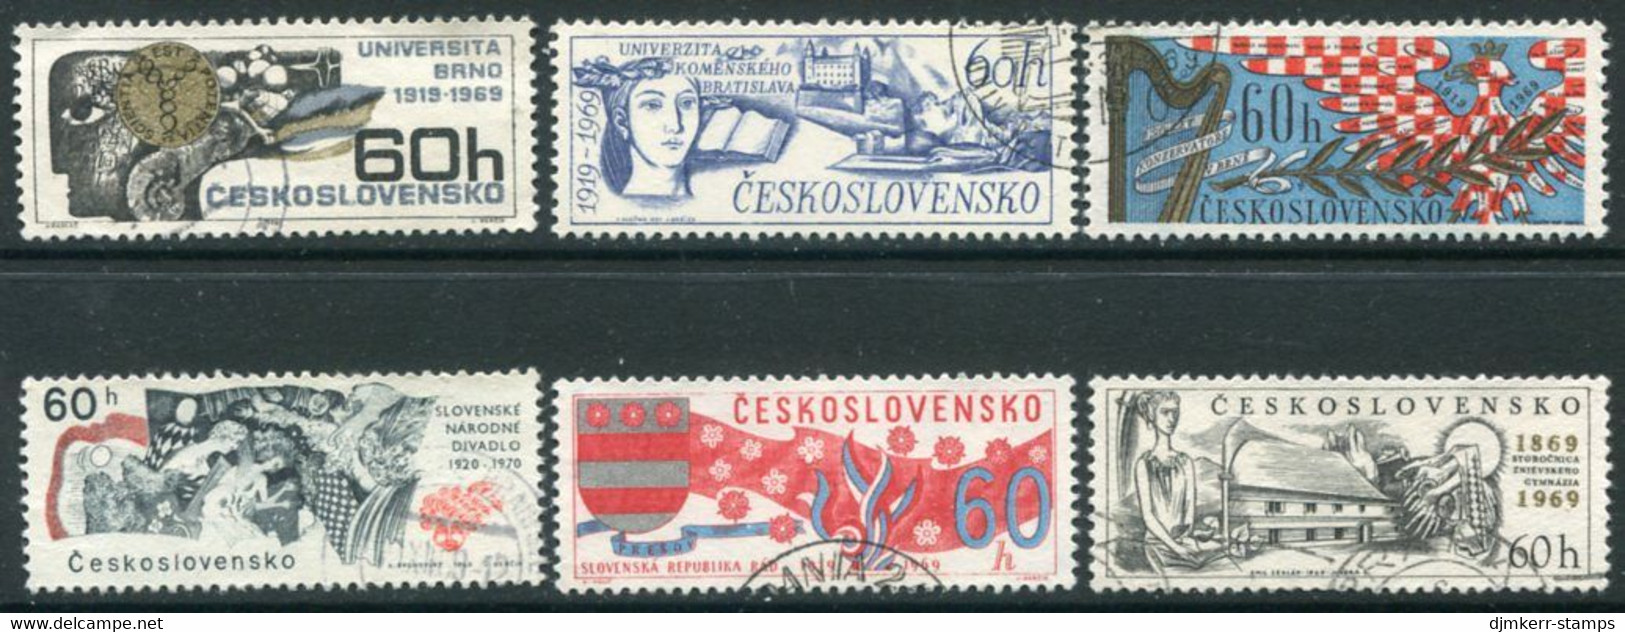 CZECHOSLOVAKIA 1969 Scientific And Cultural Anniversaries Used  Michel 1860-65 - Usados